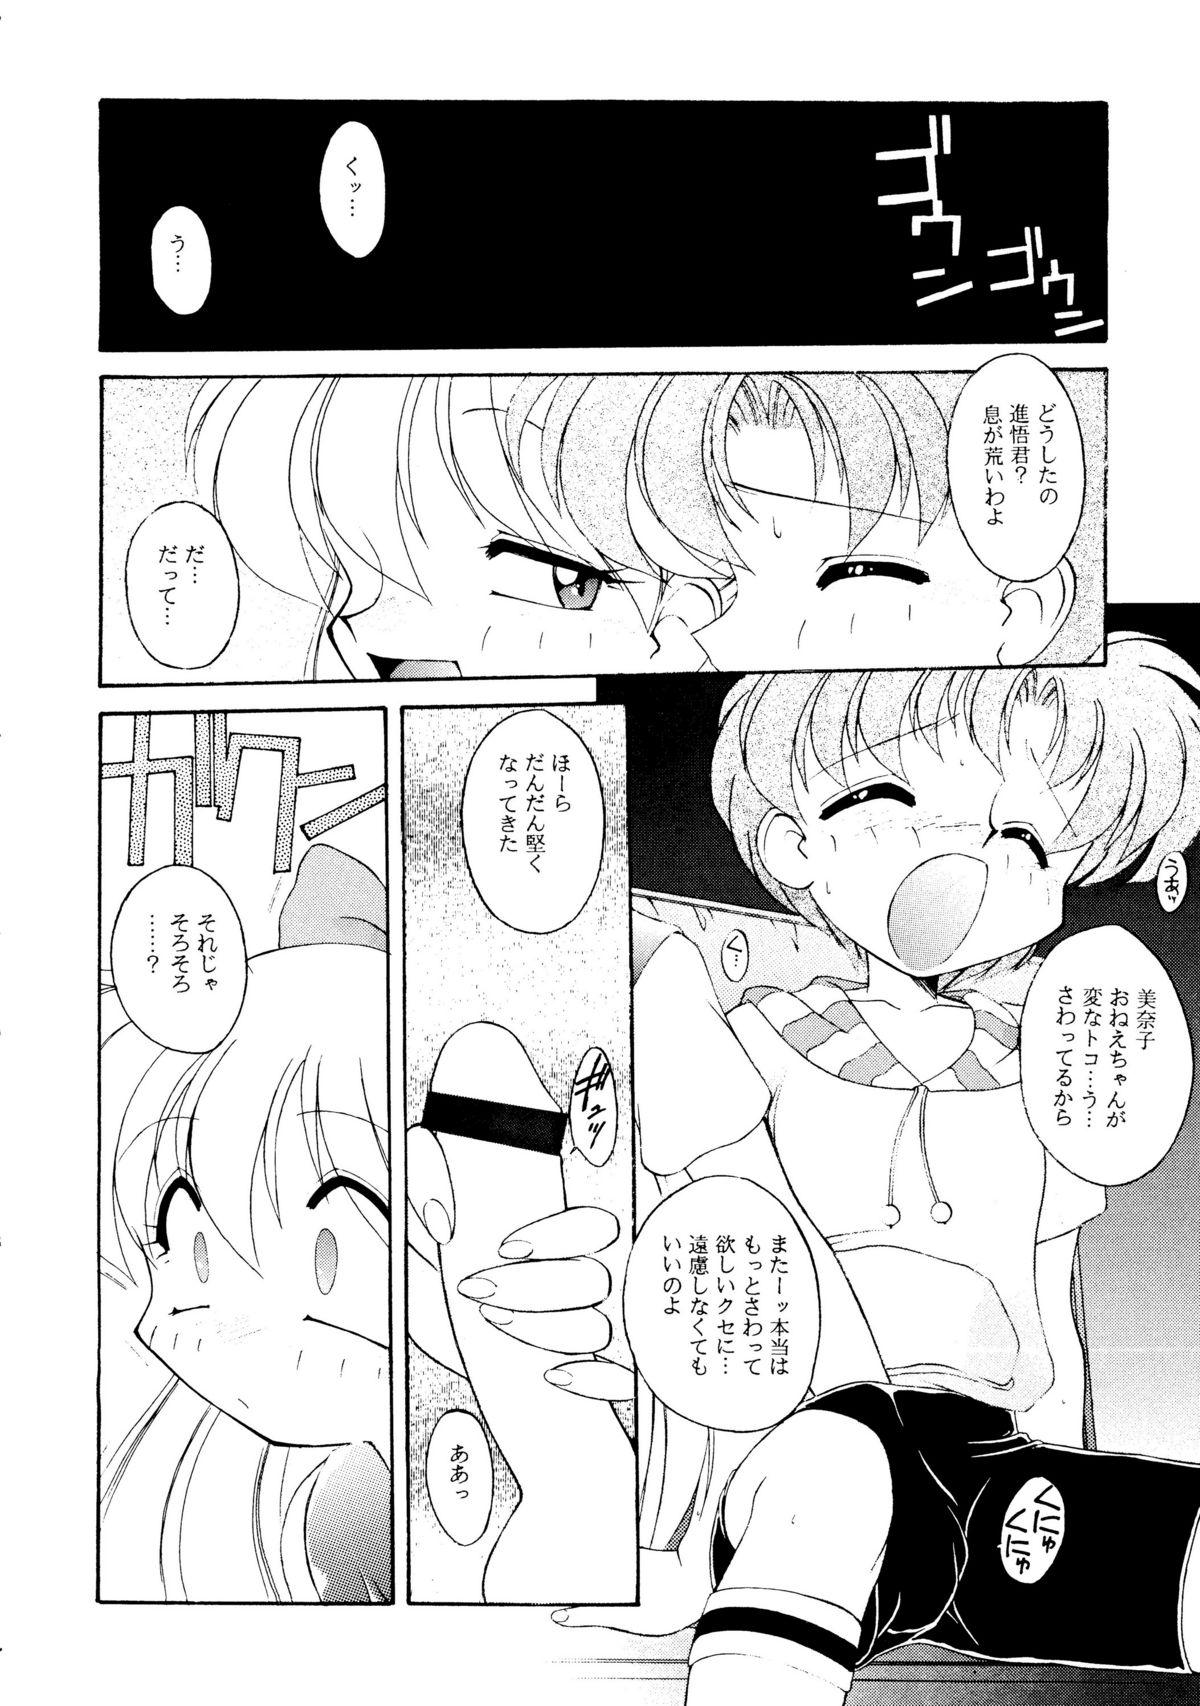 Girls HABER 8 SILVER MOON - Sailor moon Large - Page 7